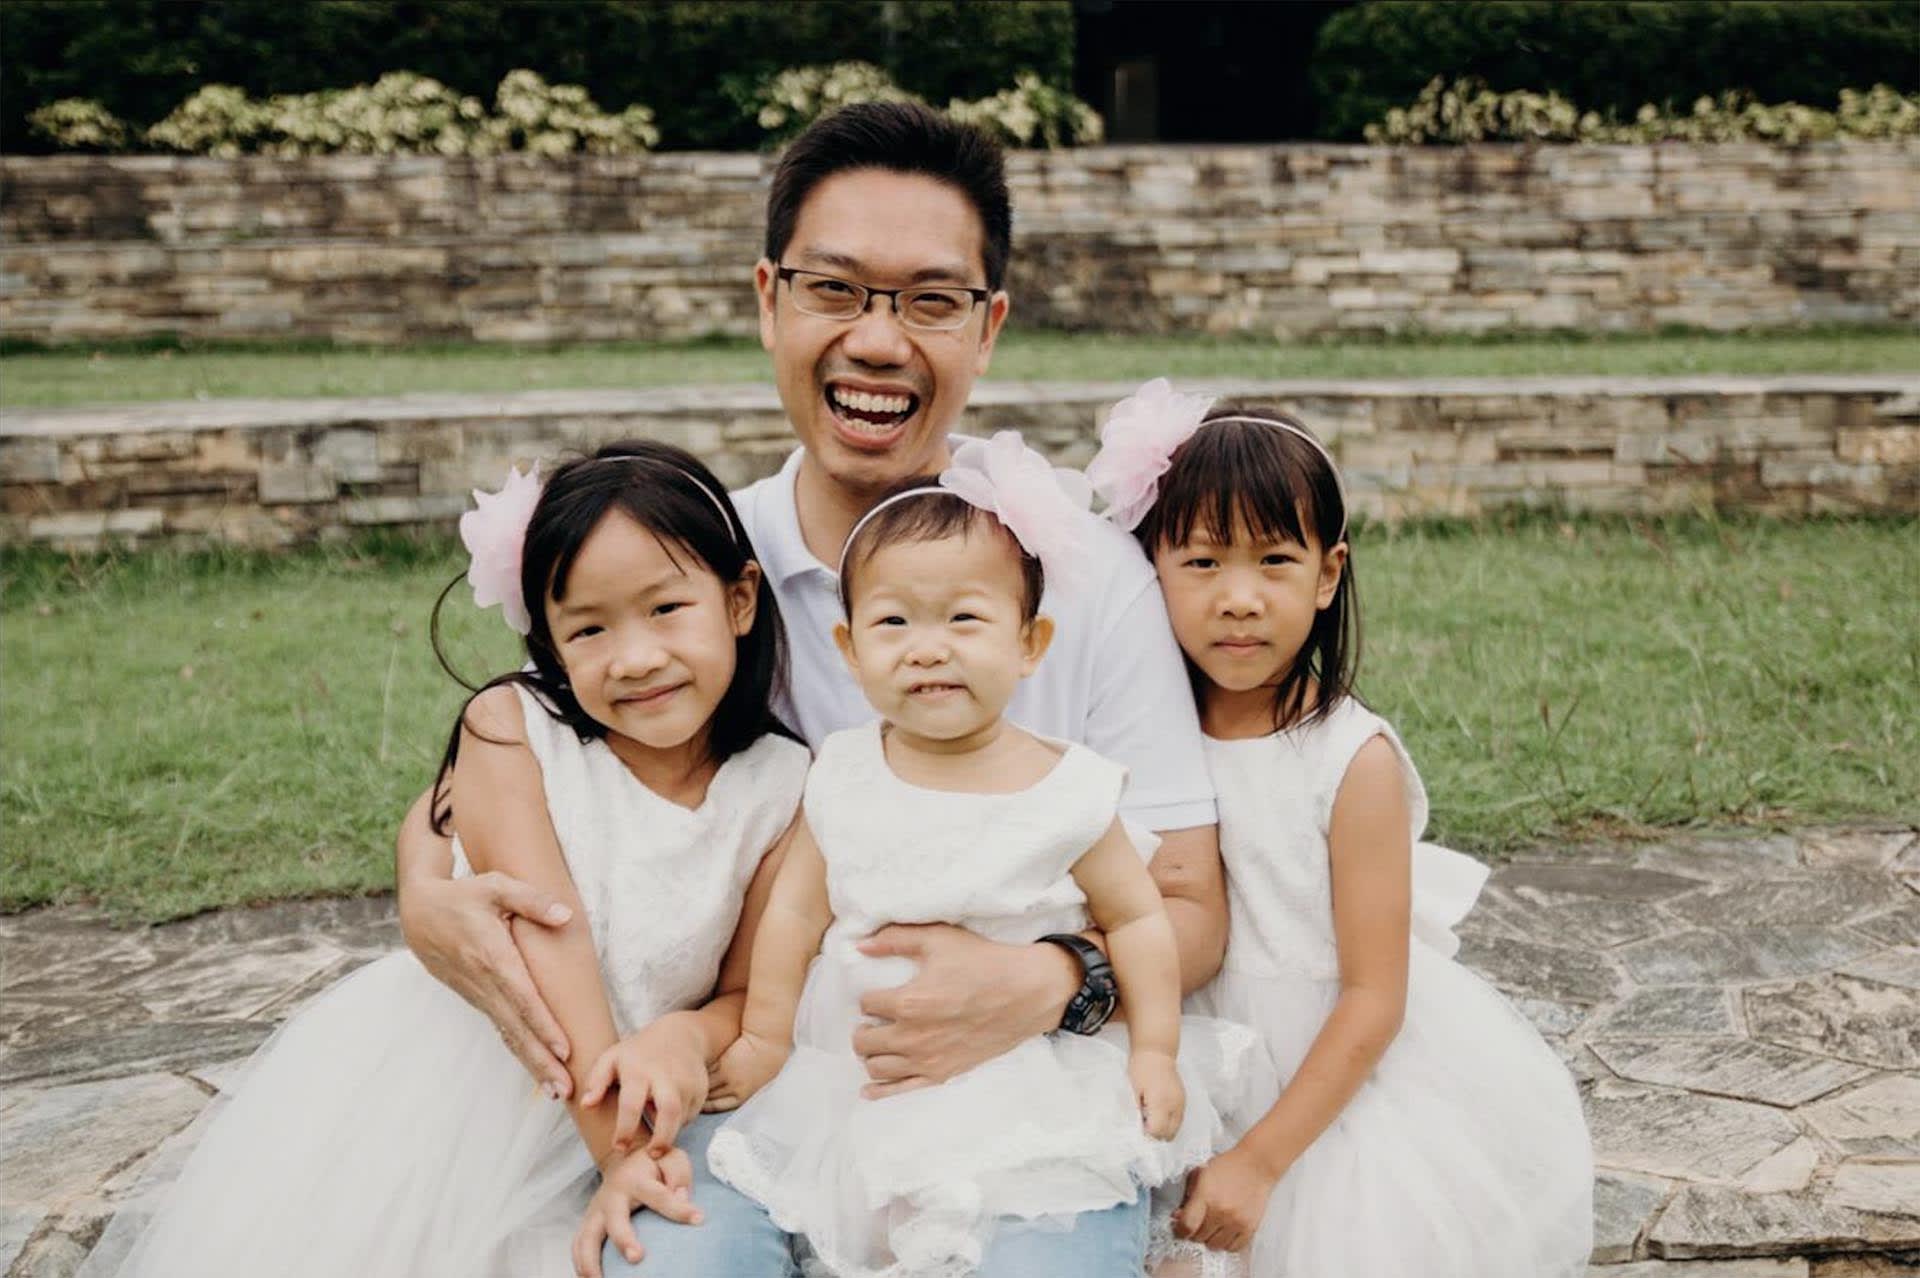 Battling Kidney Failure & Other Illnesses Made This S’porean Dad Decide He Would Homeschool His 3 Kids